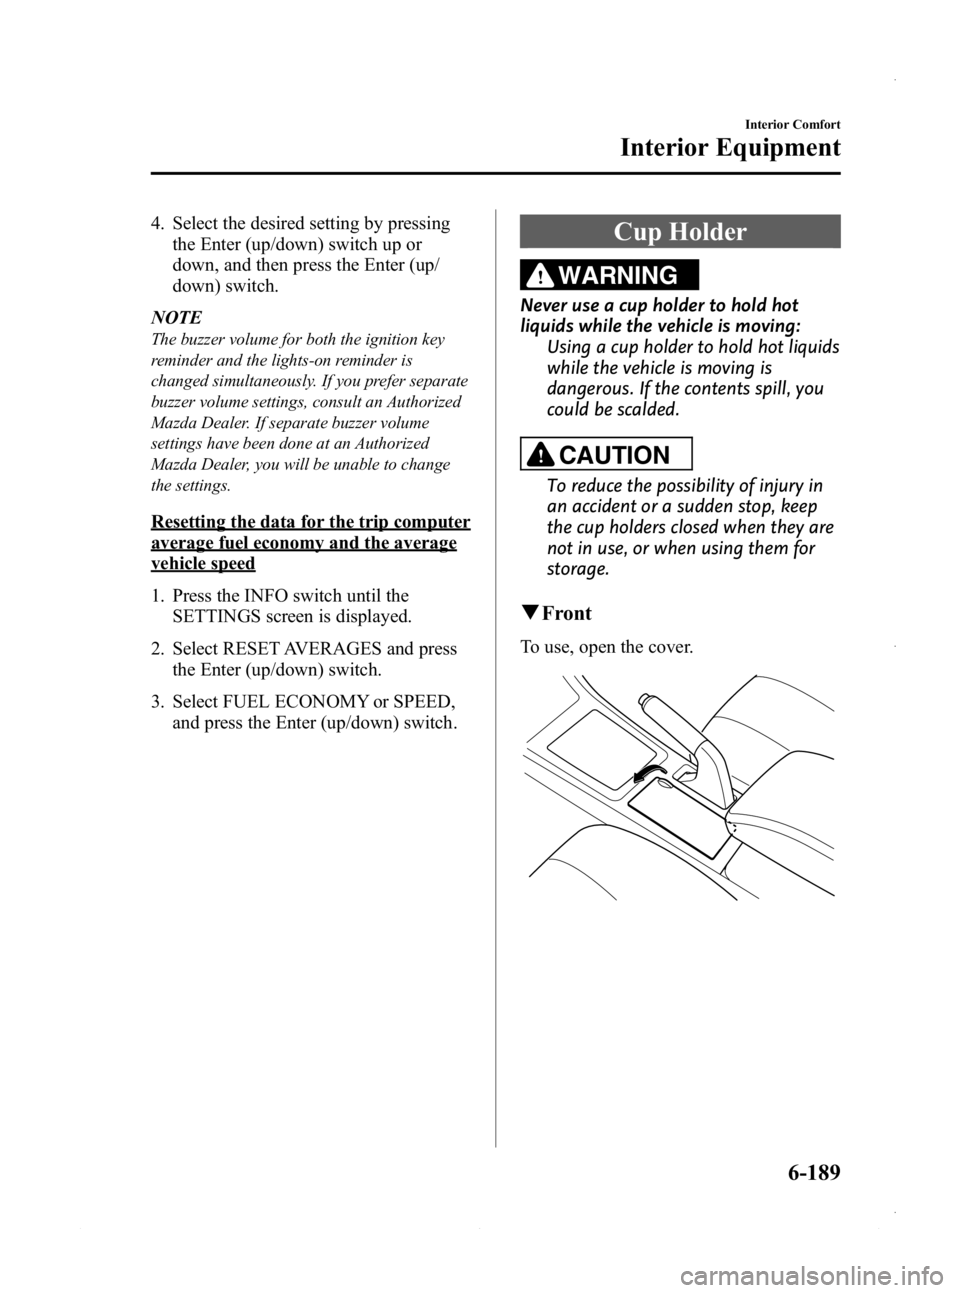 MAZDA MODEL 3 4-DOOR 2013  Owners Manual Black plate (429,1)
4. Select the desired setting by pressingthe Enter (up/down) switch up or
down, and then press the Enter (up/
down) switch.
NOTE
The buzzer volume for both the ignition key
reminde